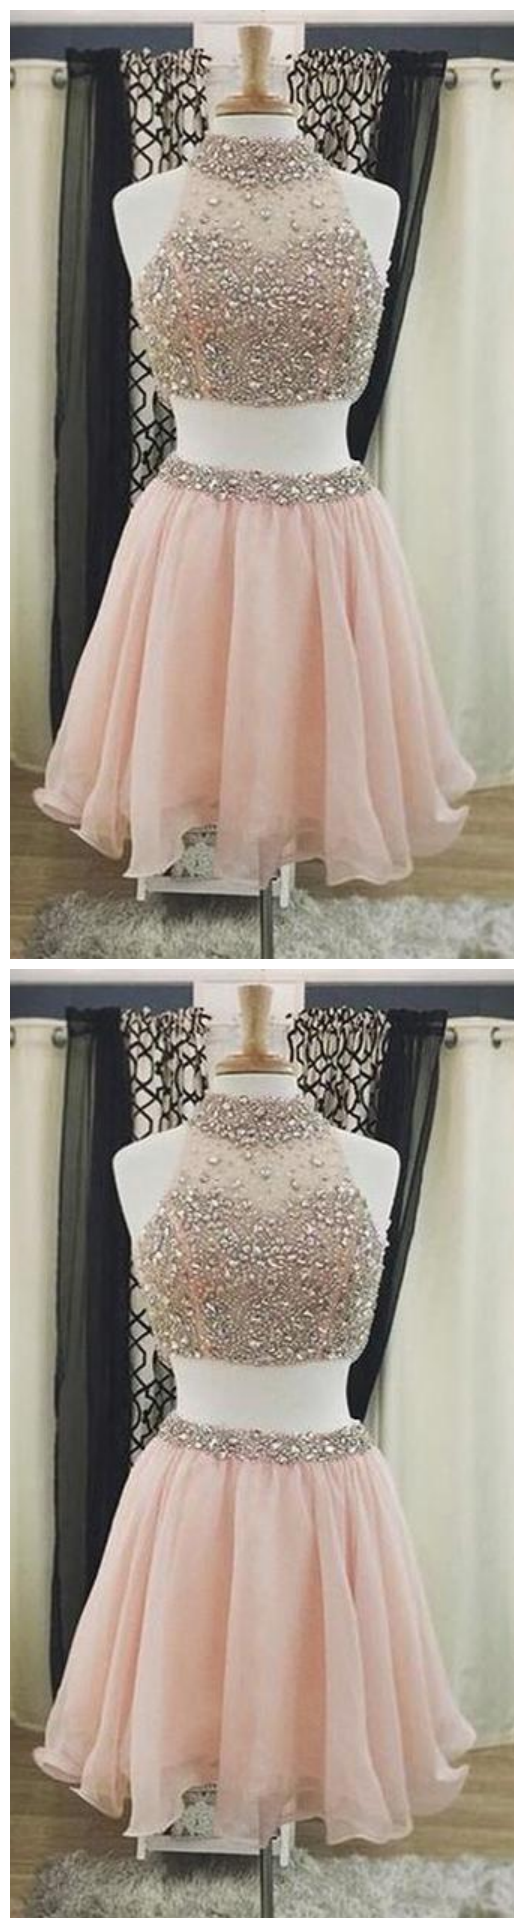 Sleeveless Beaded Homecoming Dresses,two Pieces Cocktail Dresses